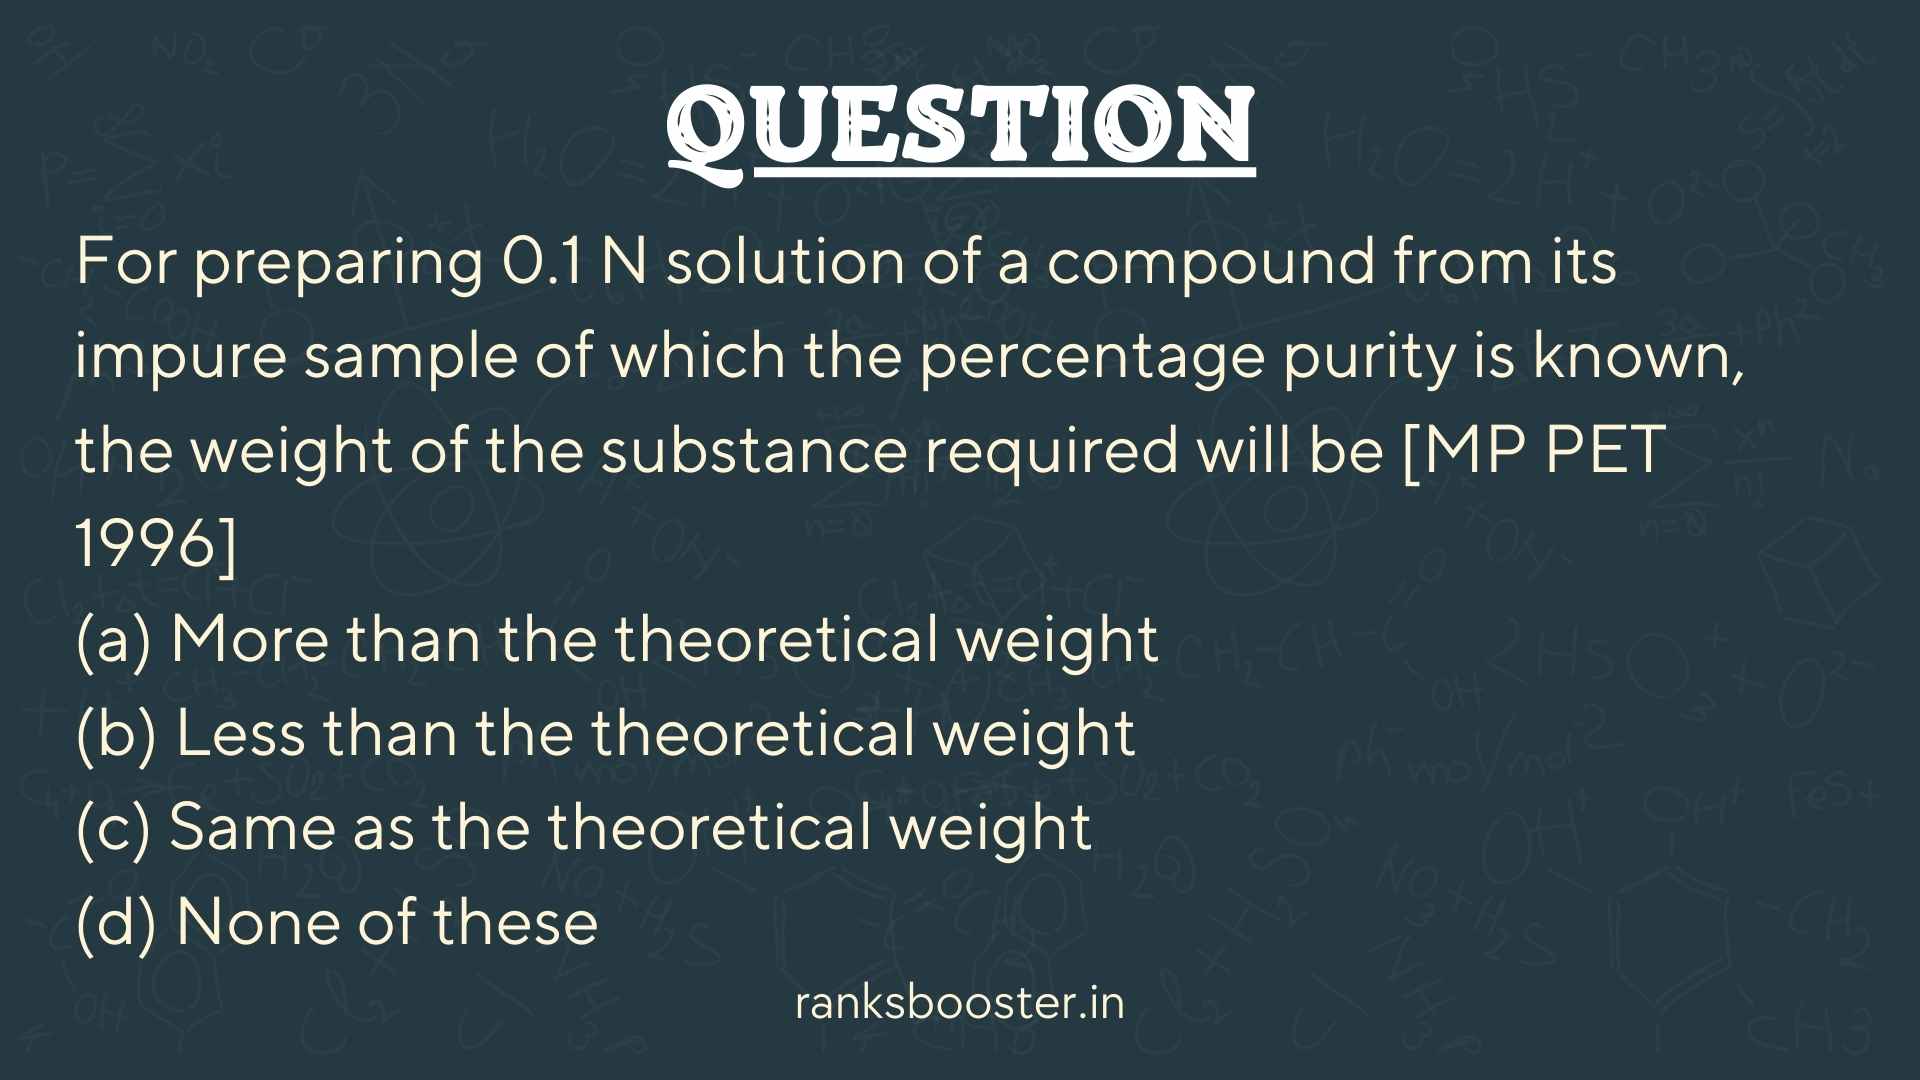 Question: For preparing 0.1 N solution of a compound from its impure sample of which the percentage purity is known, the weight of the substance required will be [MP PET 1996] (a) More than the theoretical weight (b) Less than the theoretical weight (c) Same as the theoretical weight (d) None of these